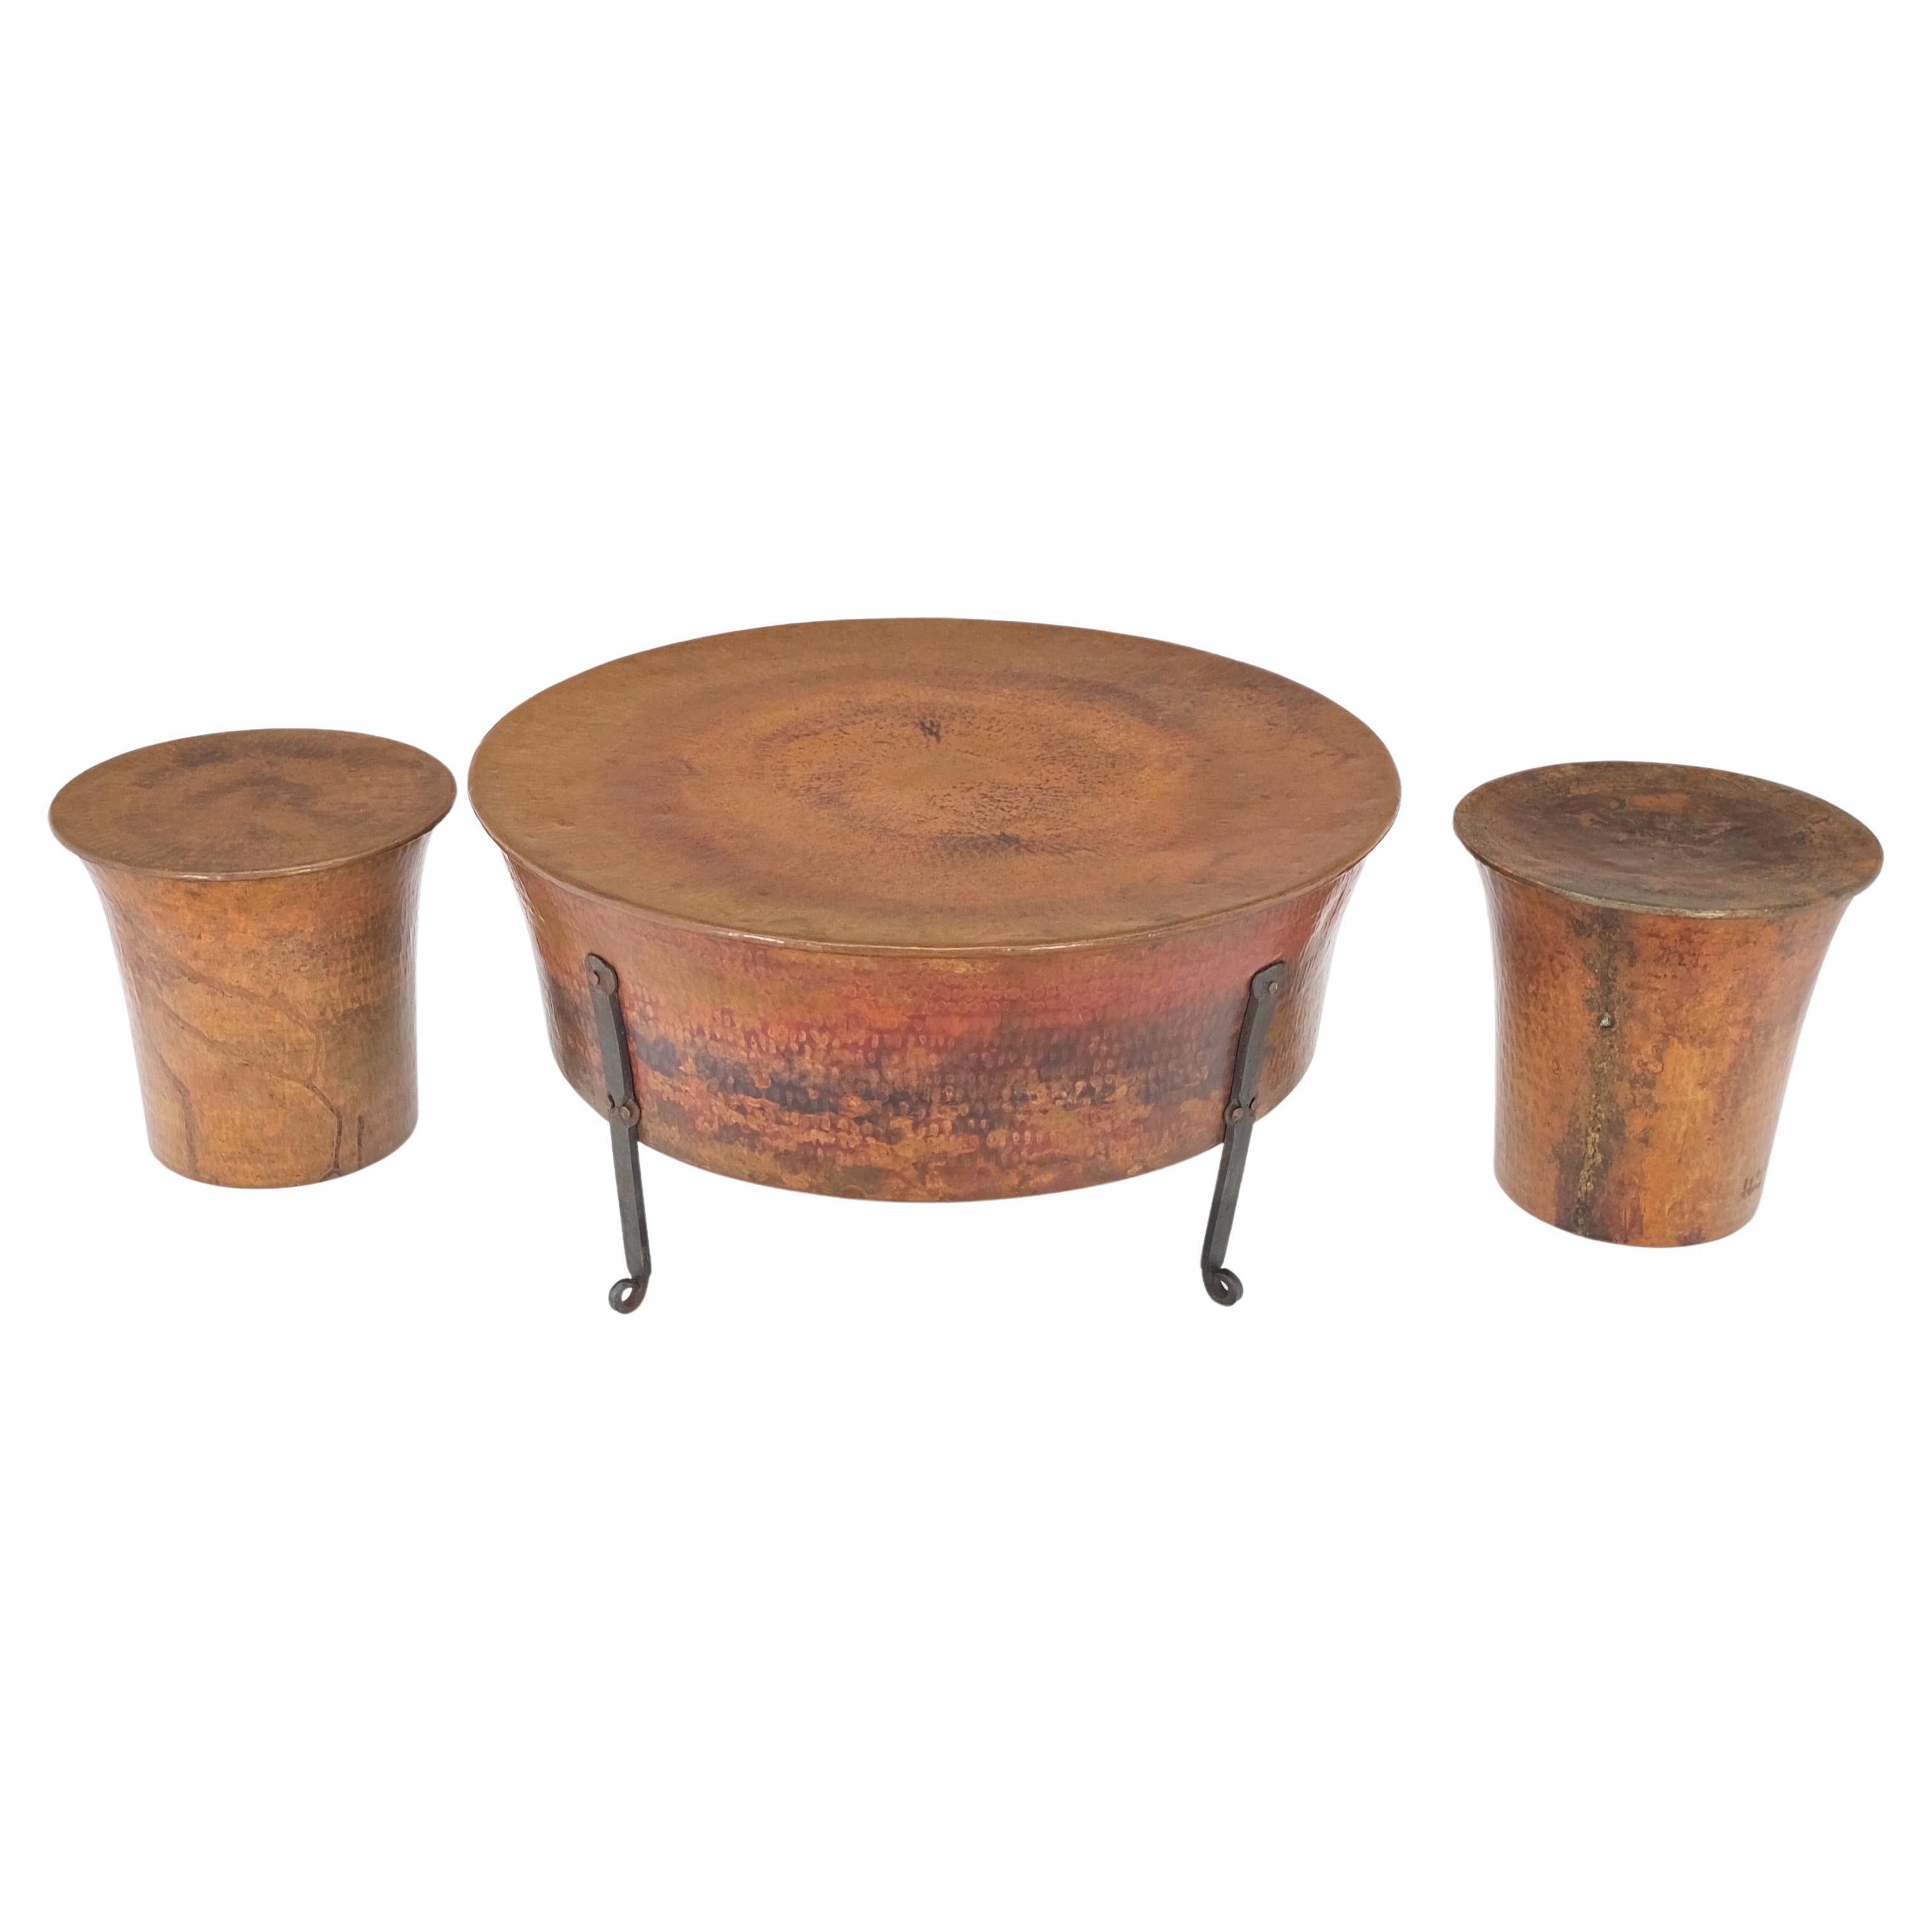 Vintage Hummered Forged Copper & Iron Round Coffee Table & Pair of Stools Seats For Sale